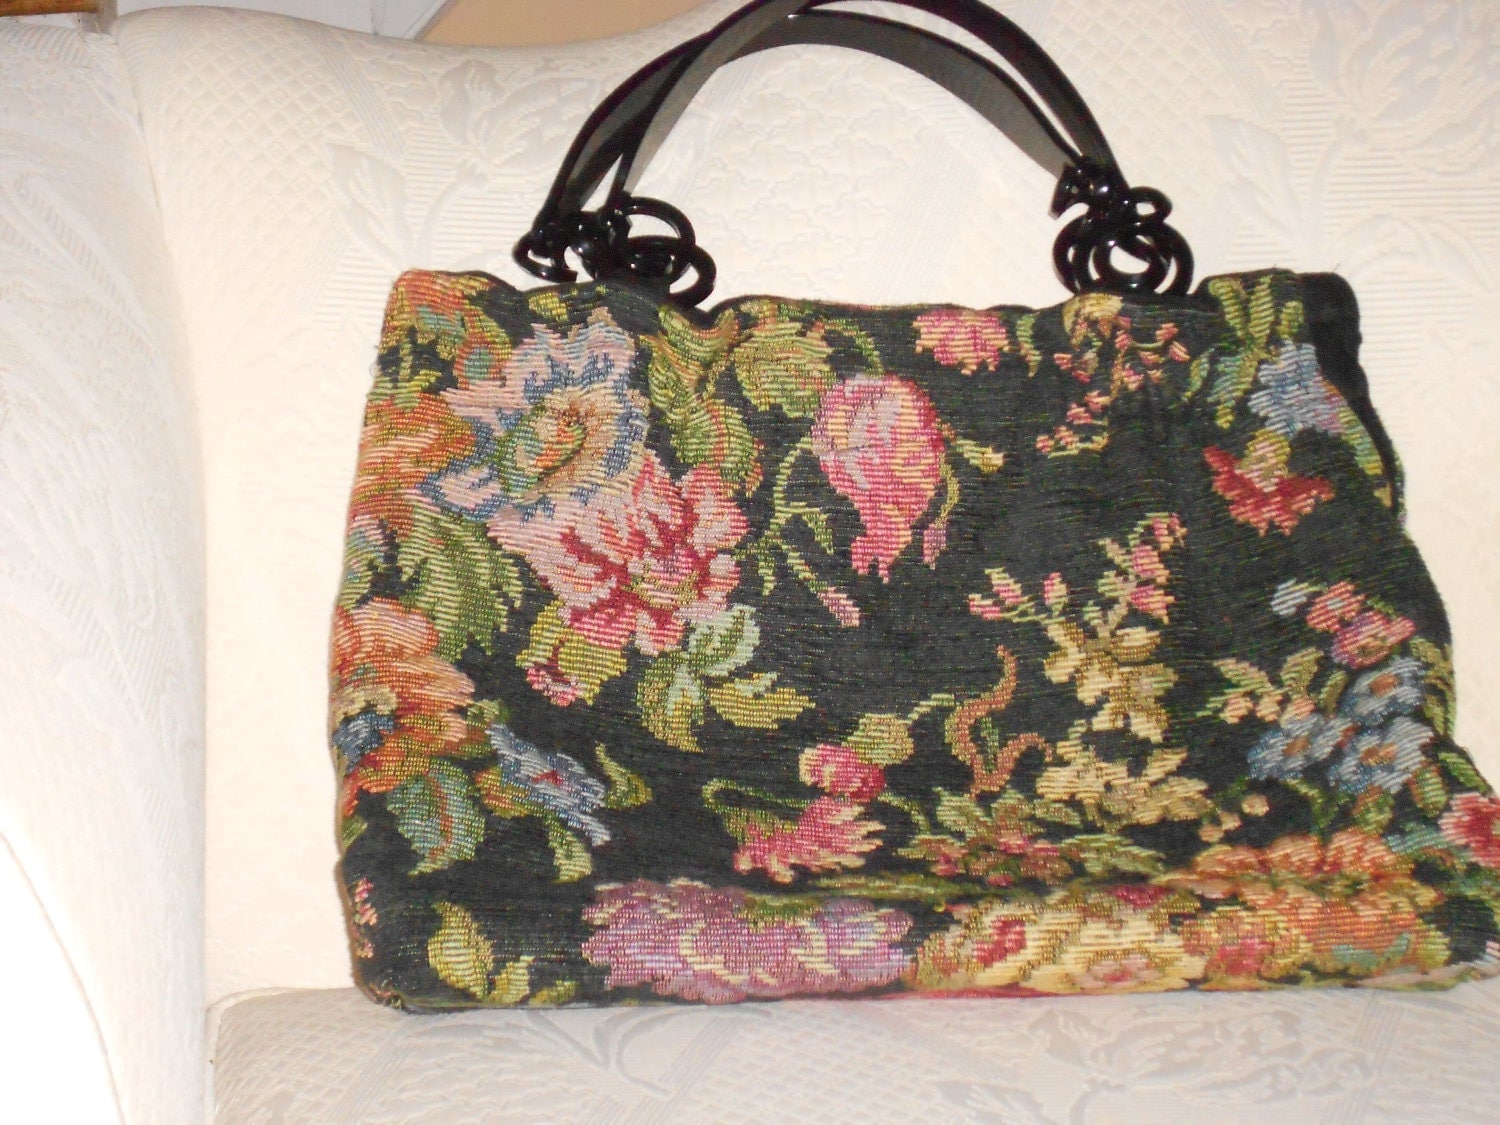 Large carpet bag by EmylouDesigns on Etsy